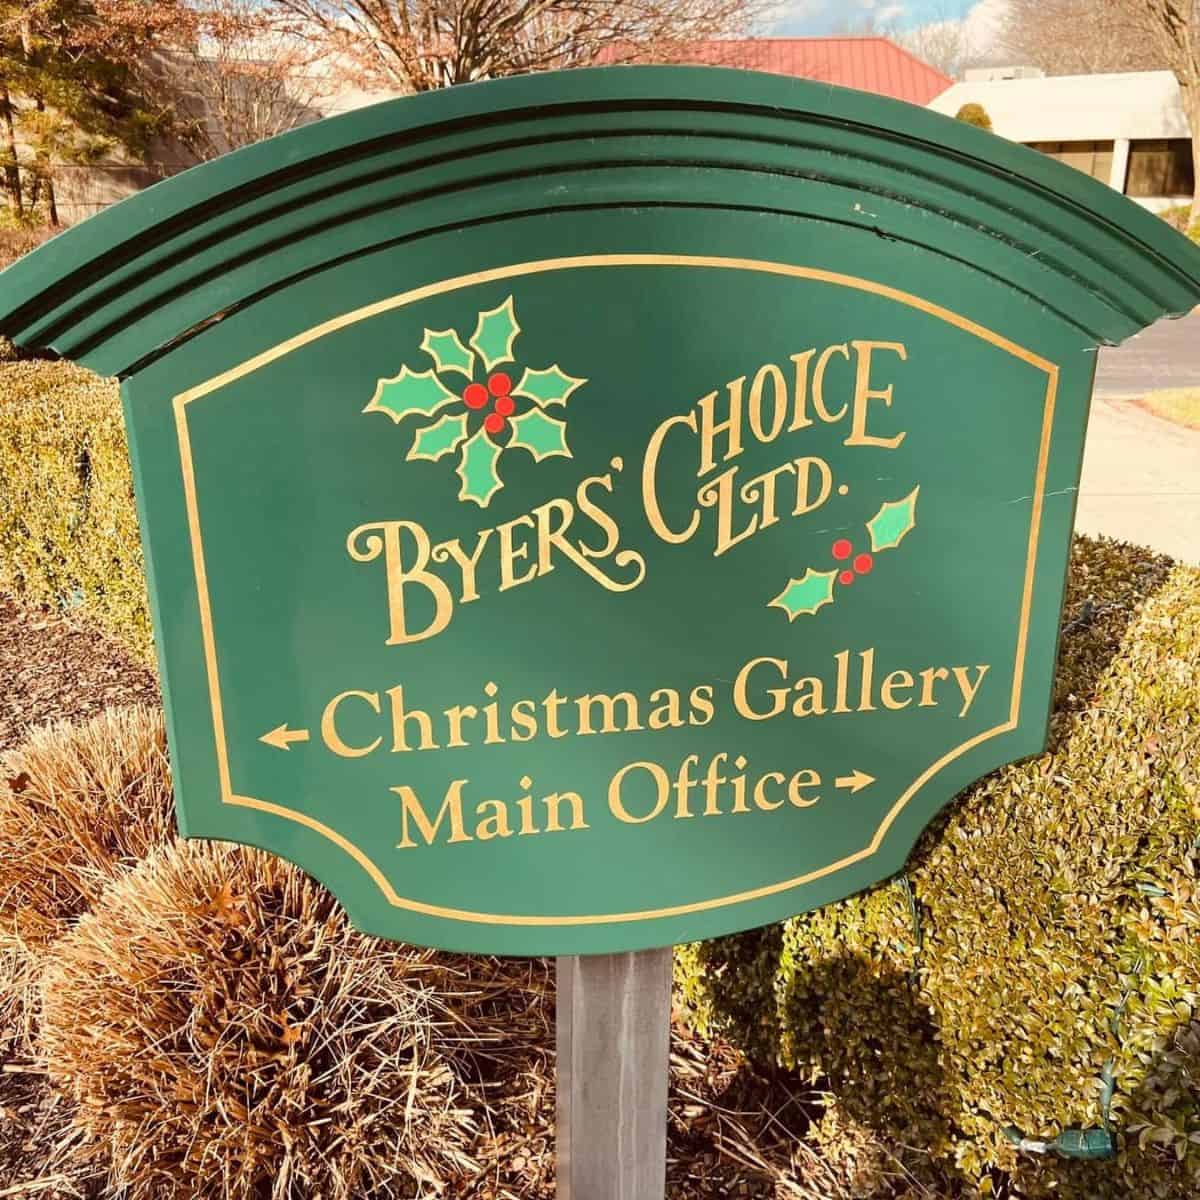 Tips for Visiting the Byers’ Choice Christmas Museum